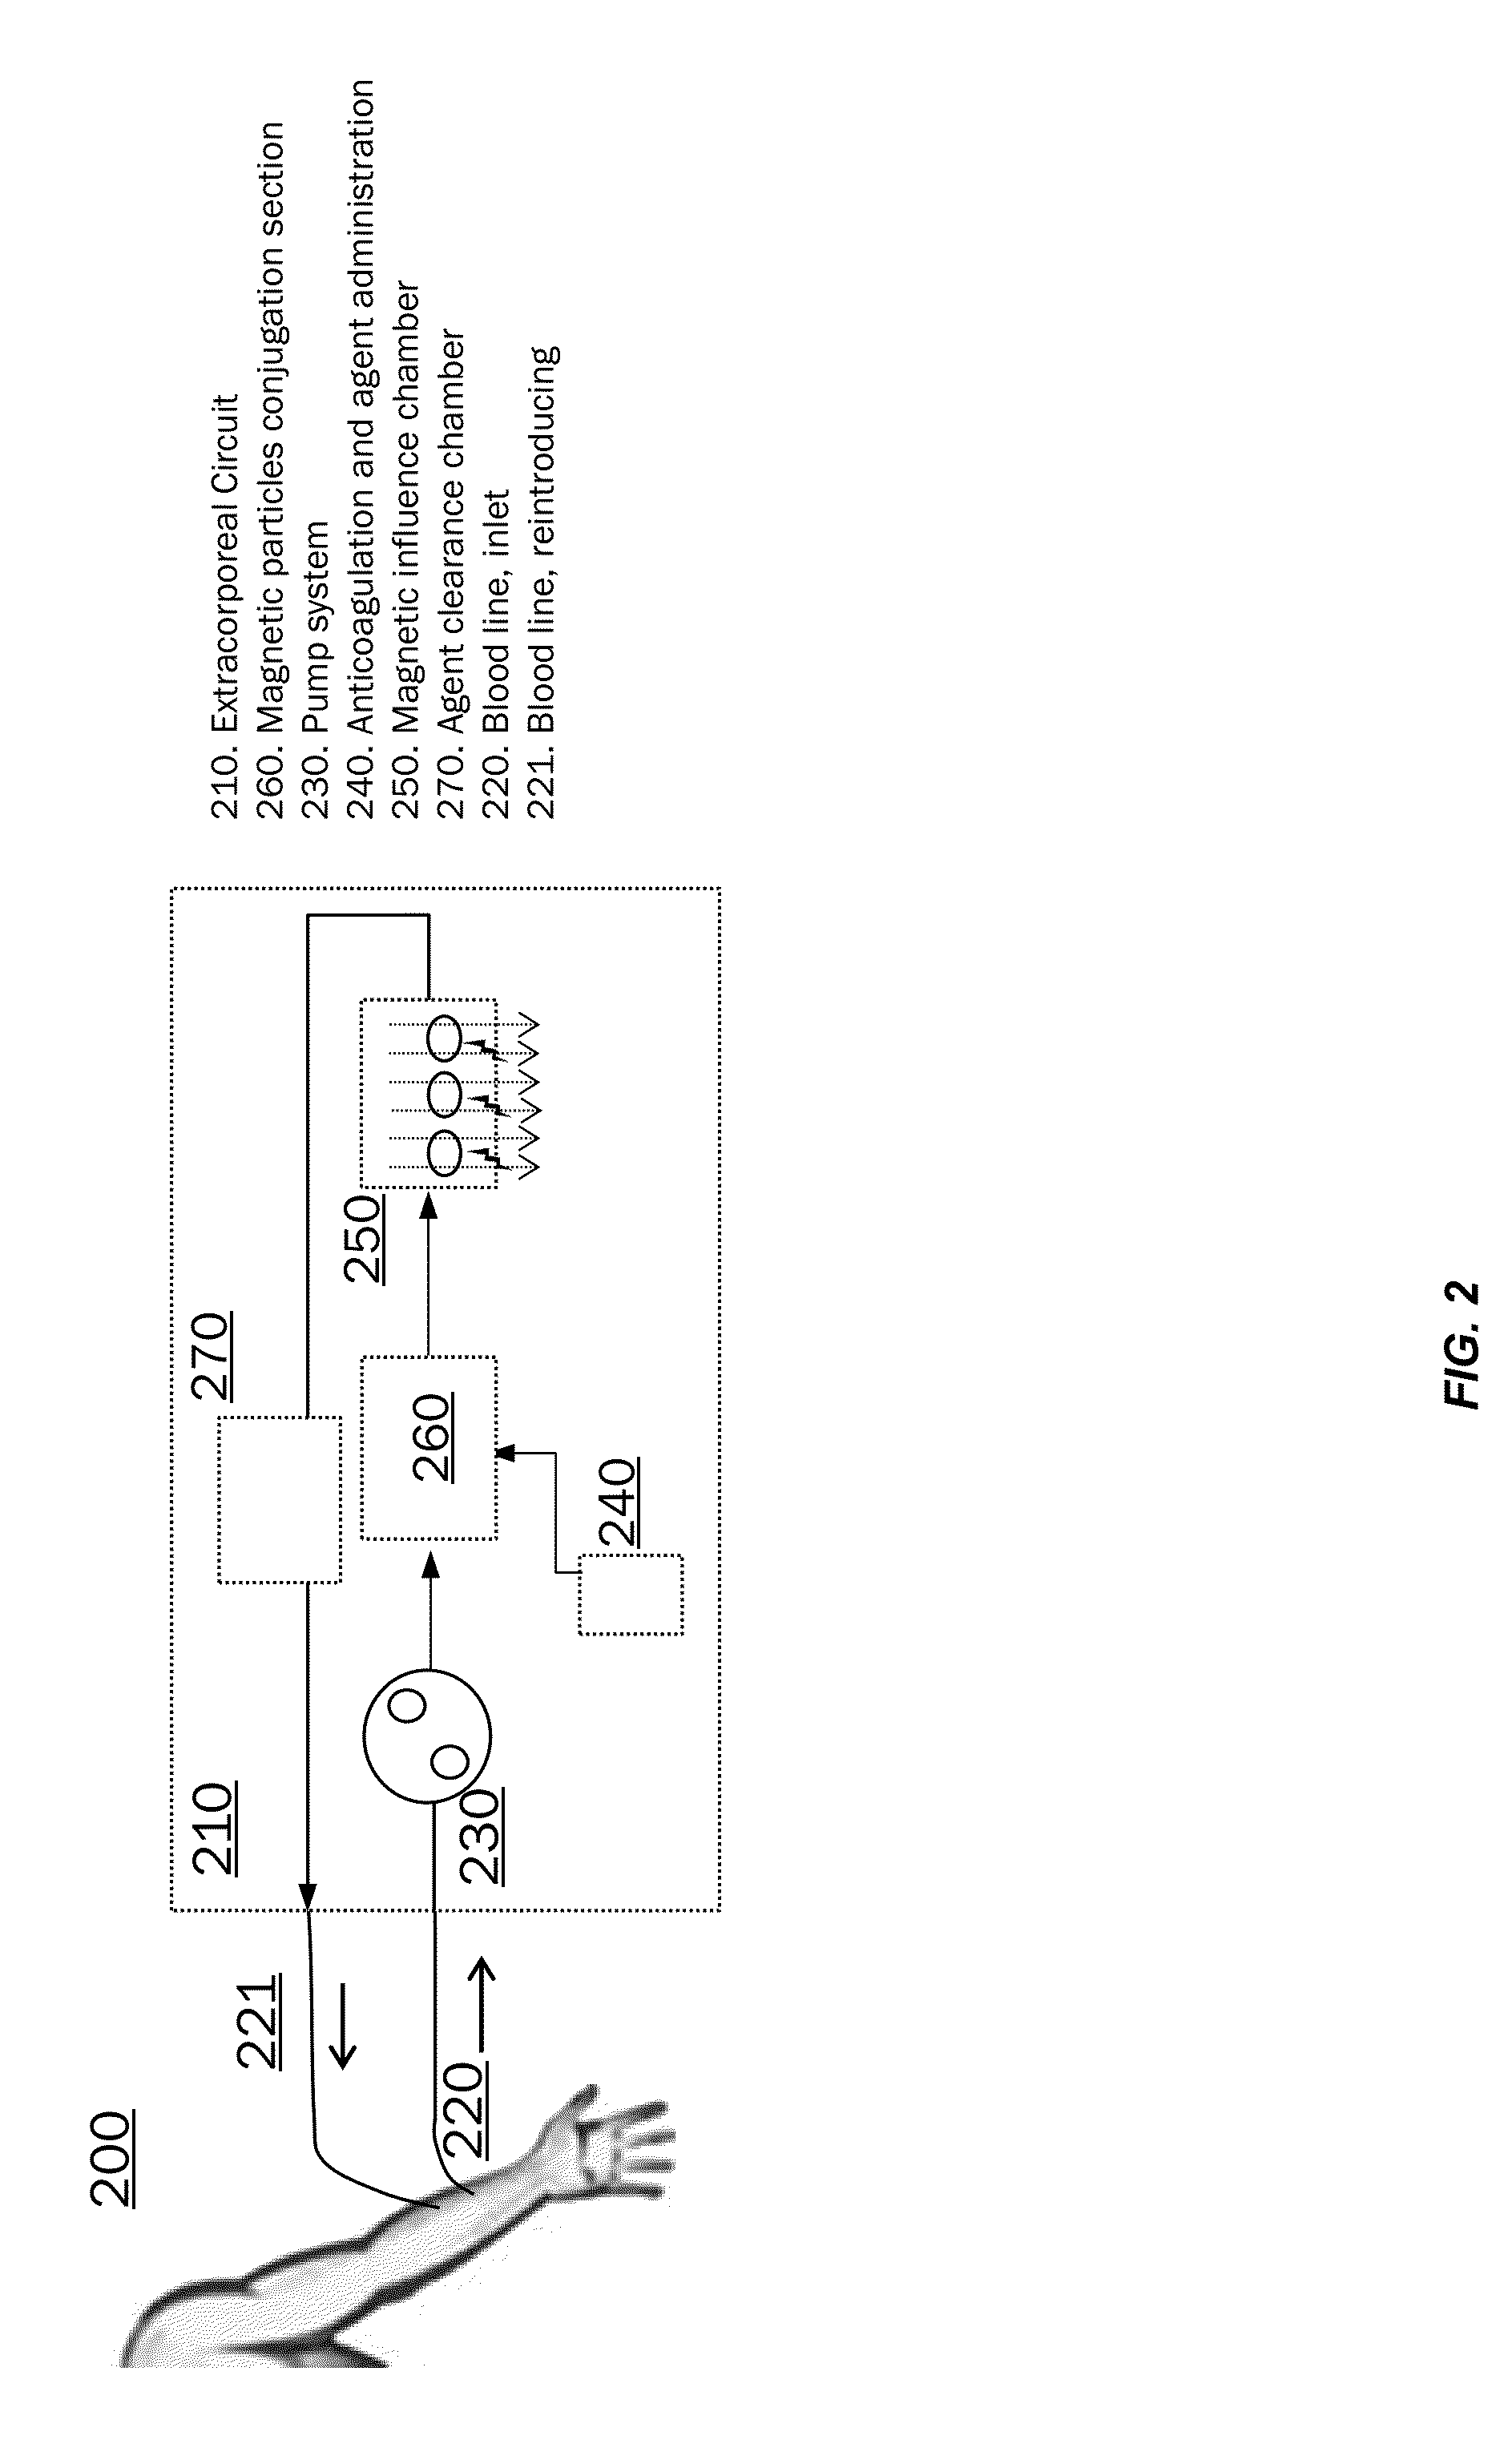 Treatment of circulating tumor cells using an extracorporeal device